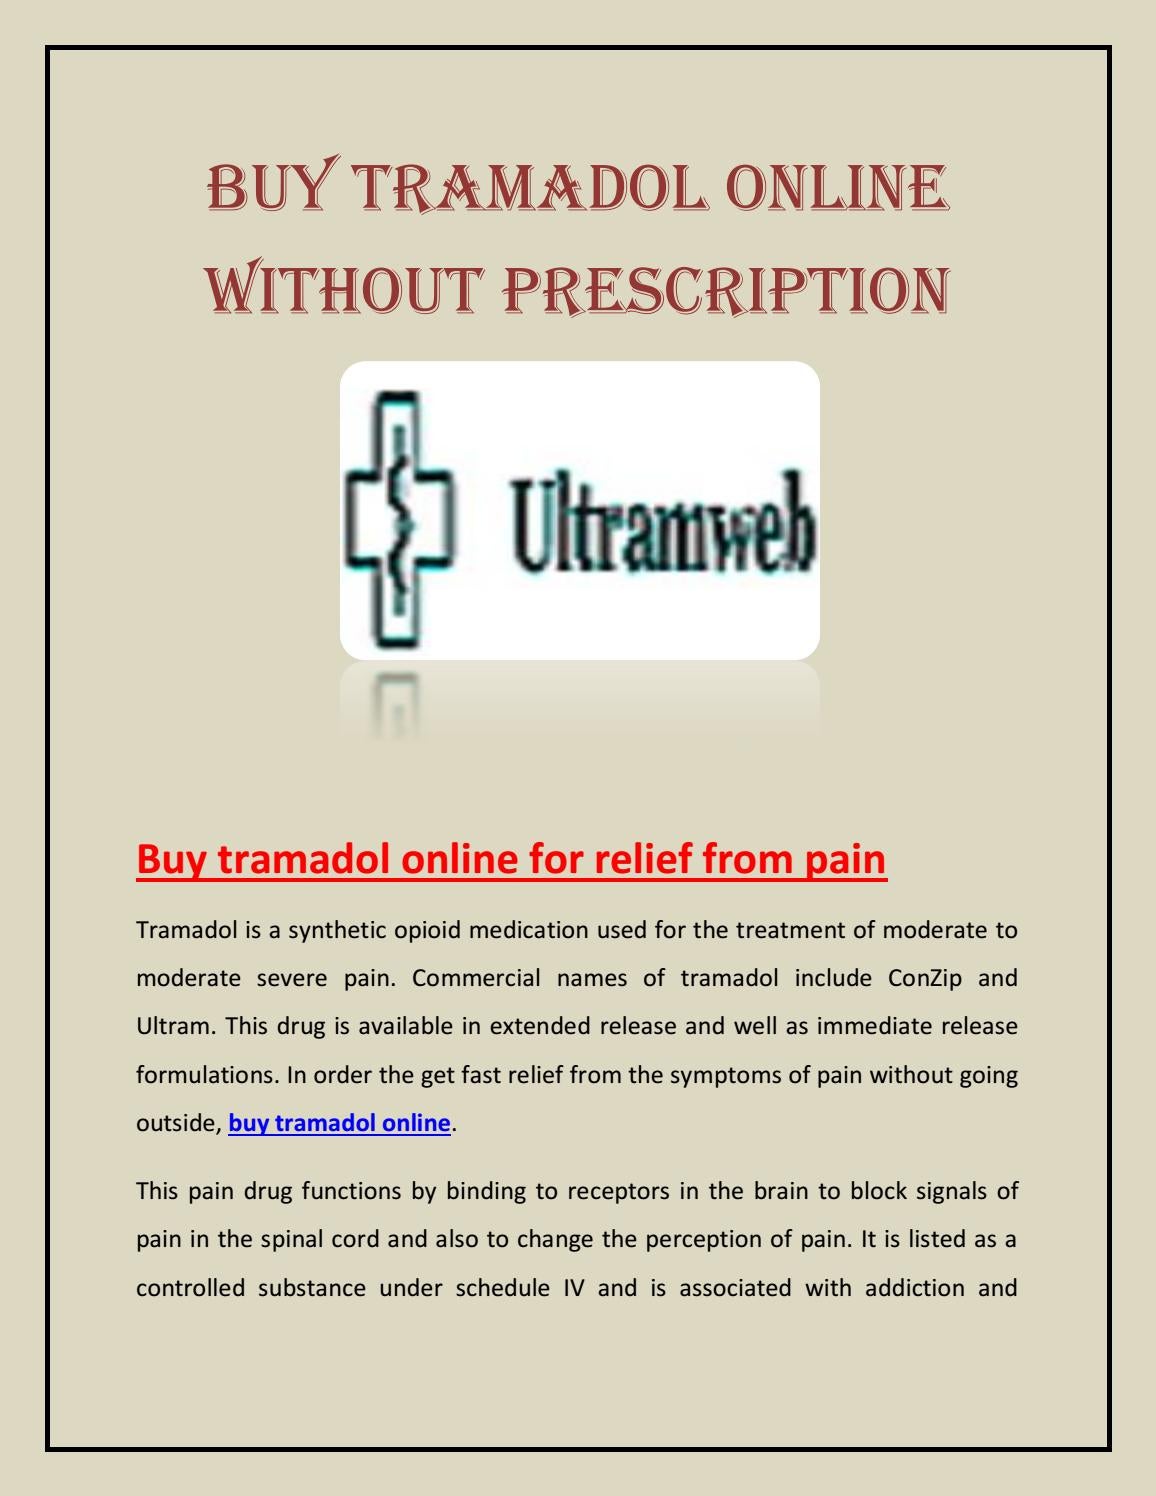 Buy Tramadol Online Without Prescriptions